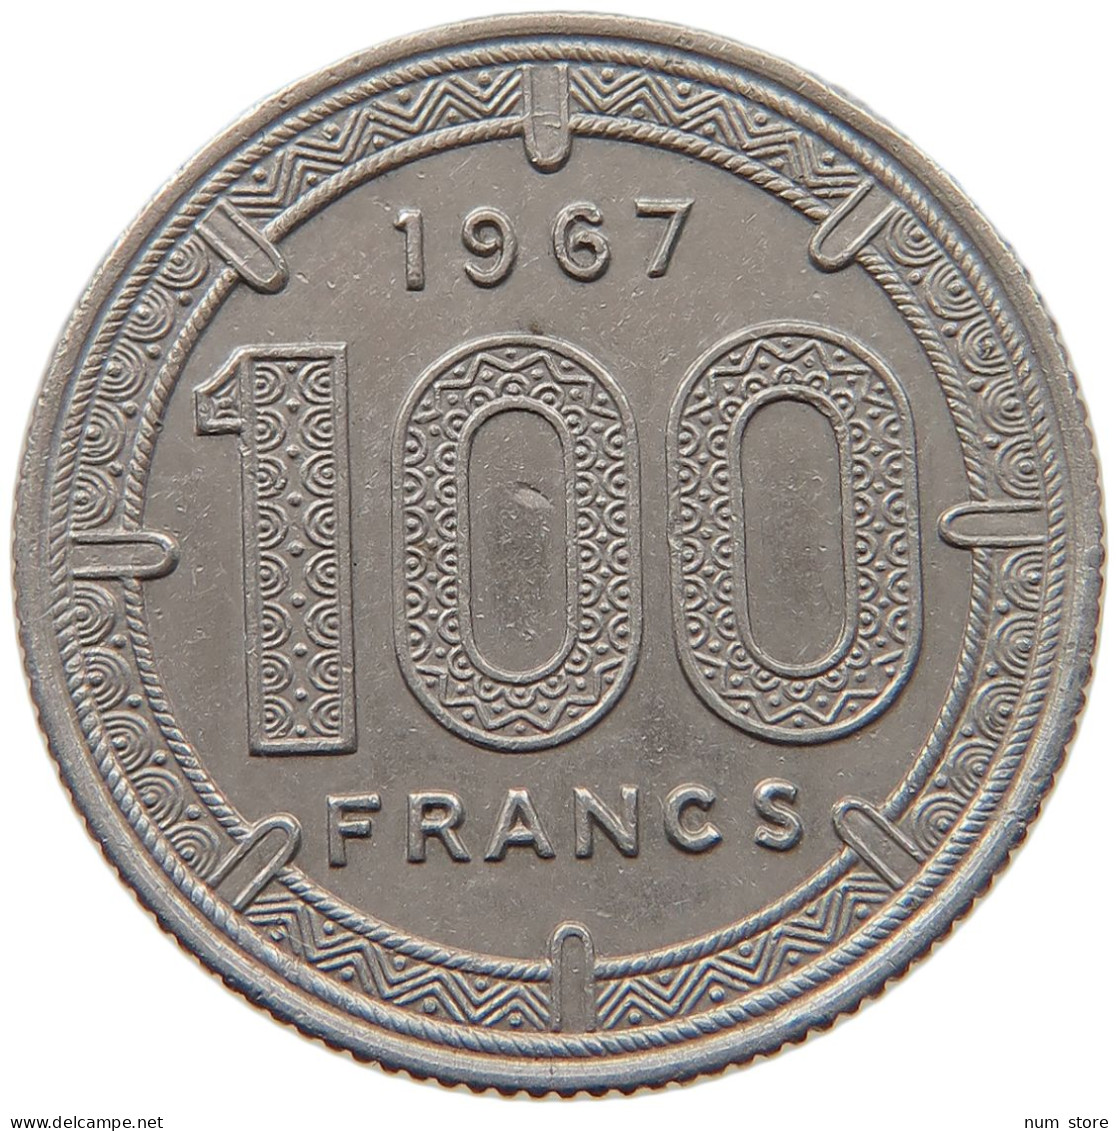 CENTRAL AFRICAN STATES 100 FRANCS 1967  #MA 065283 - Centraal-Afrikaanse Republiek